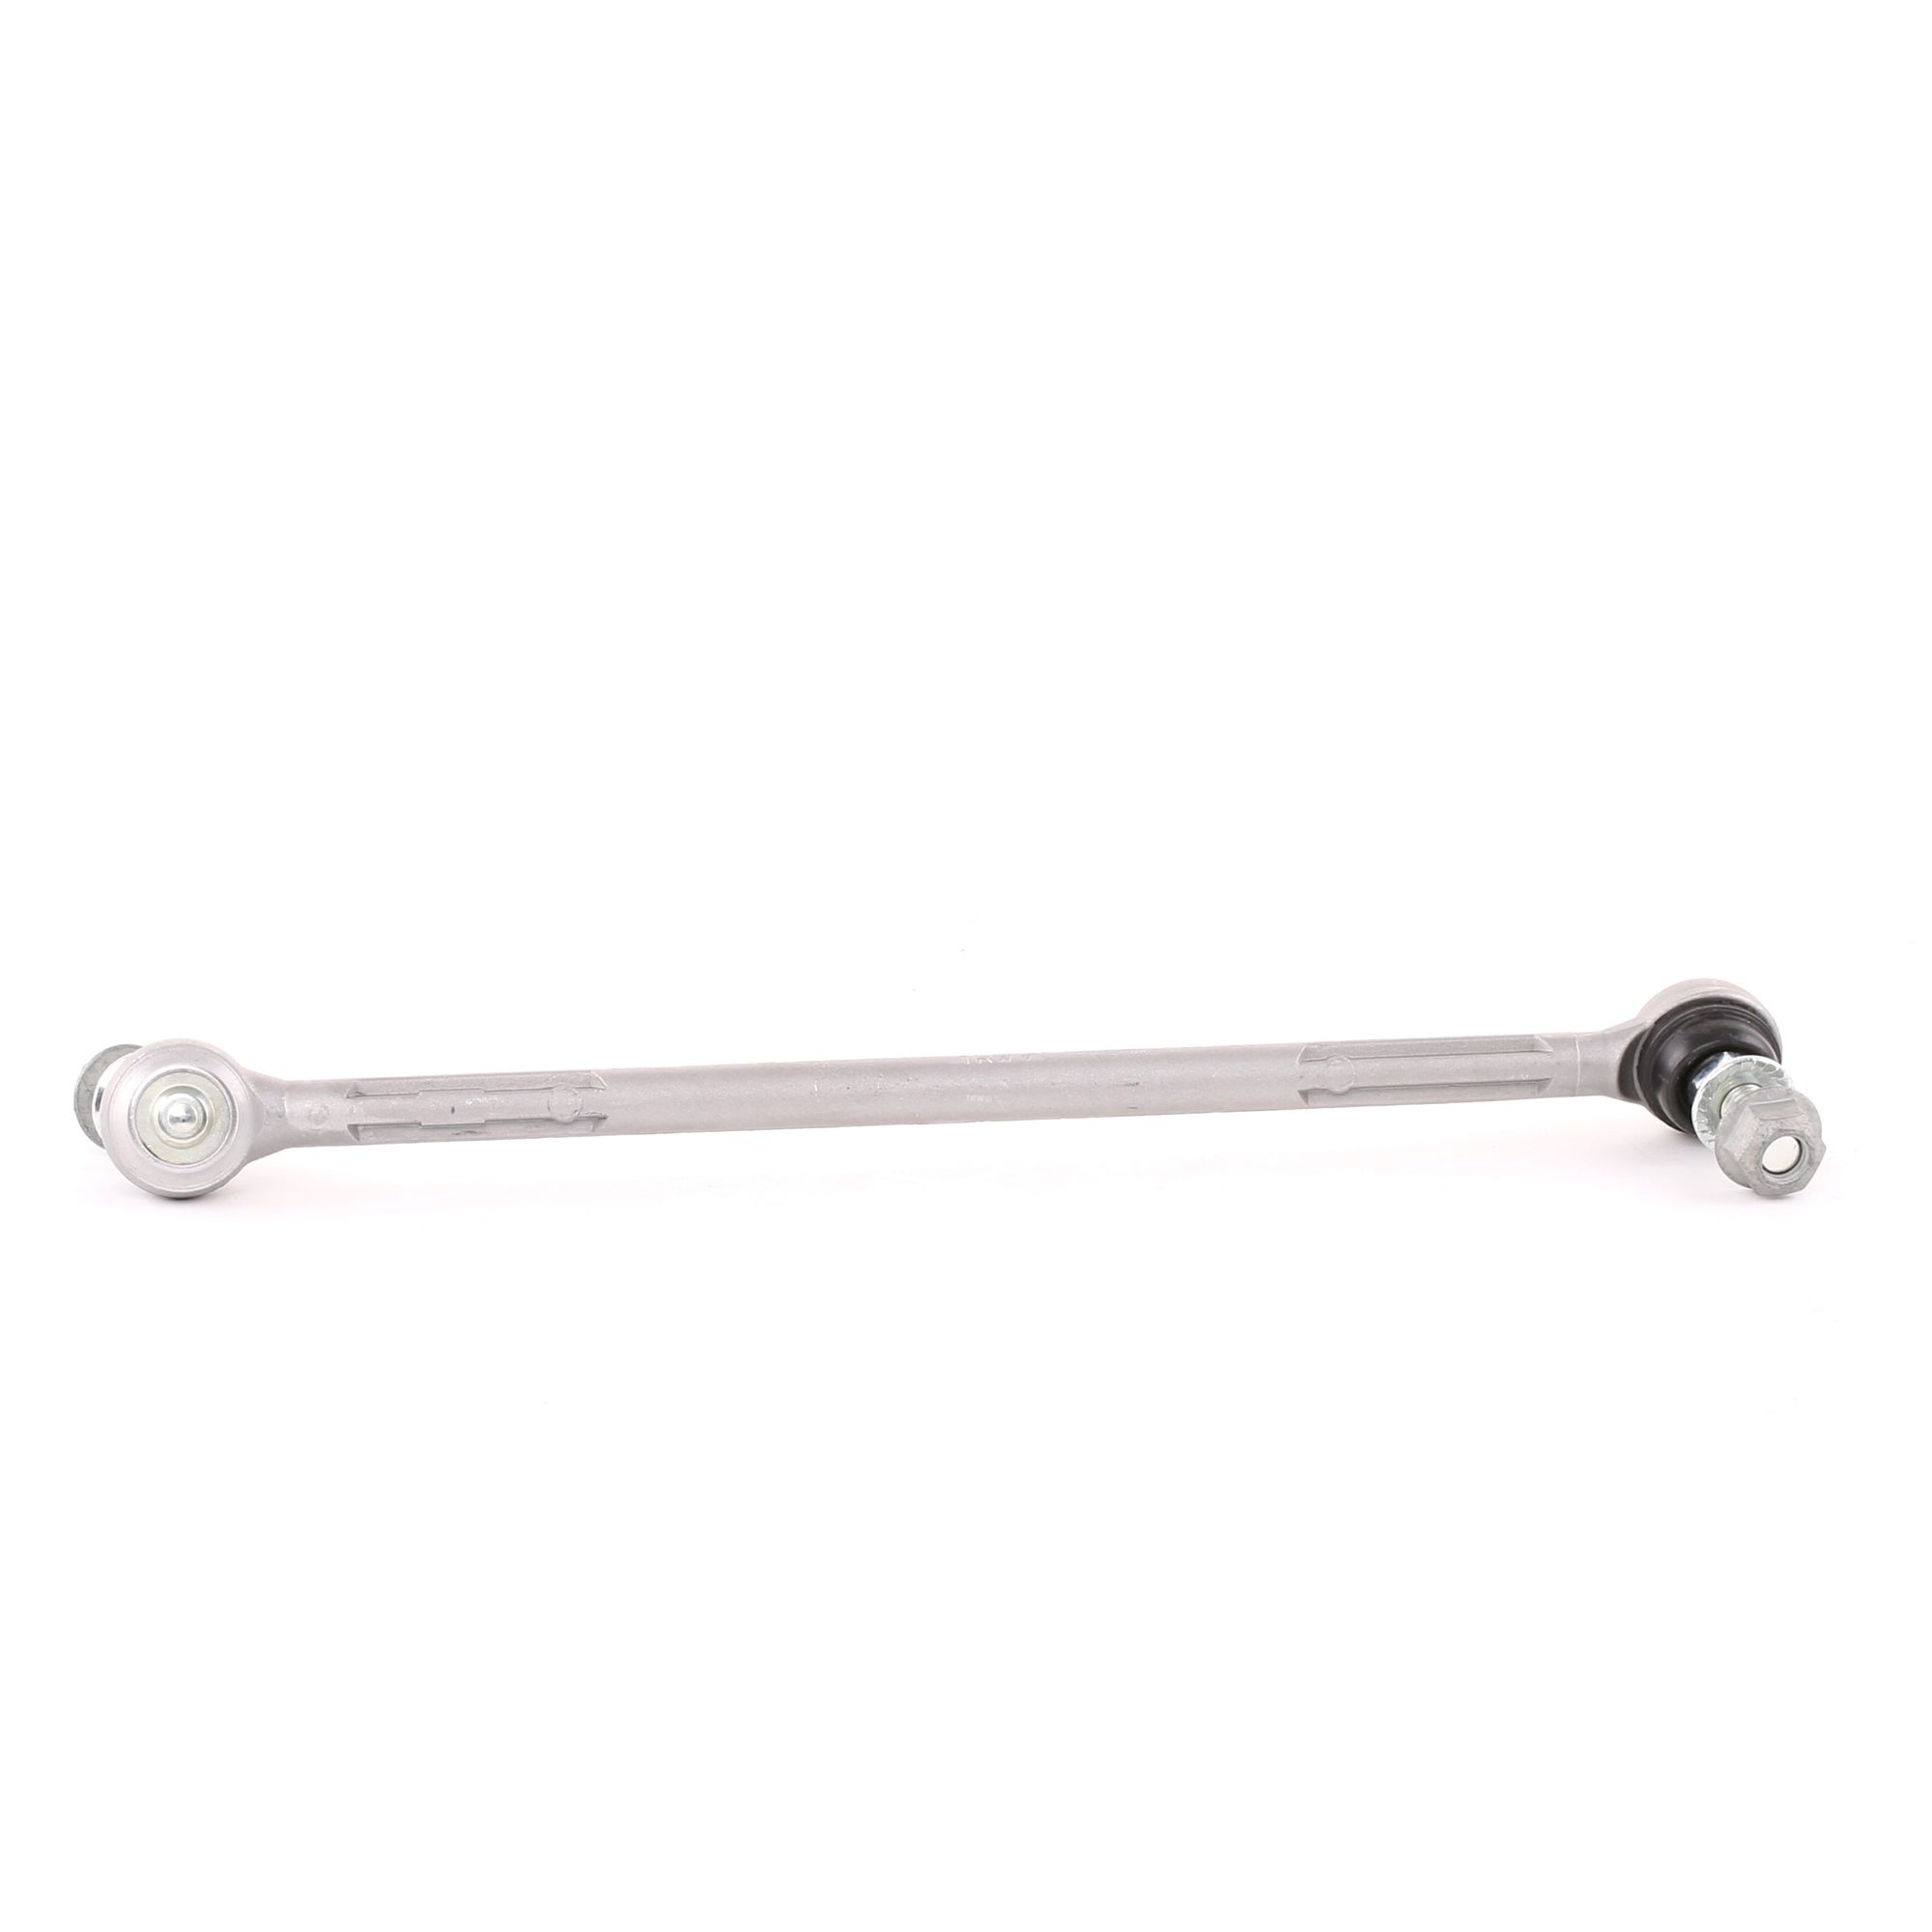 TRW JTS613 Anti-roll bar link BMW experience and price